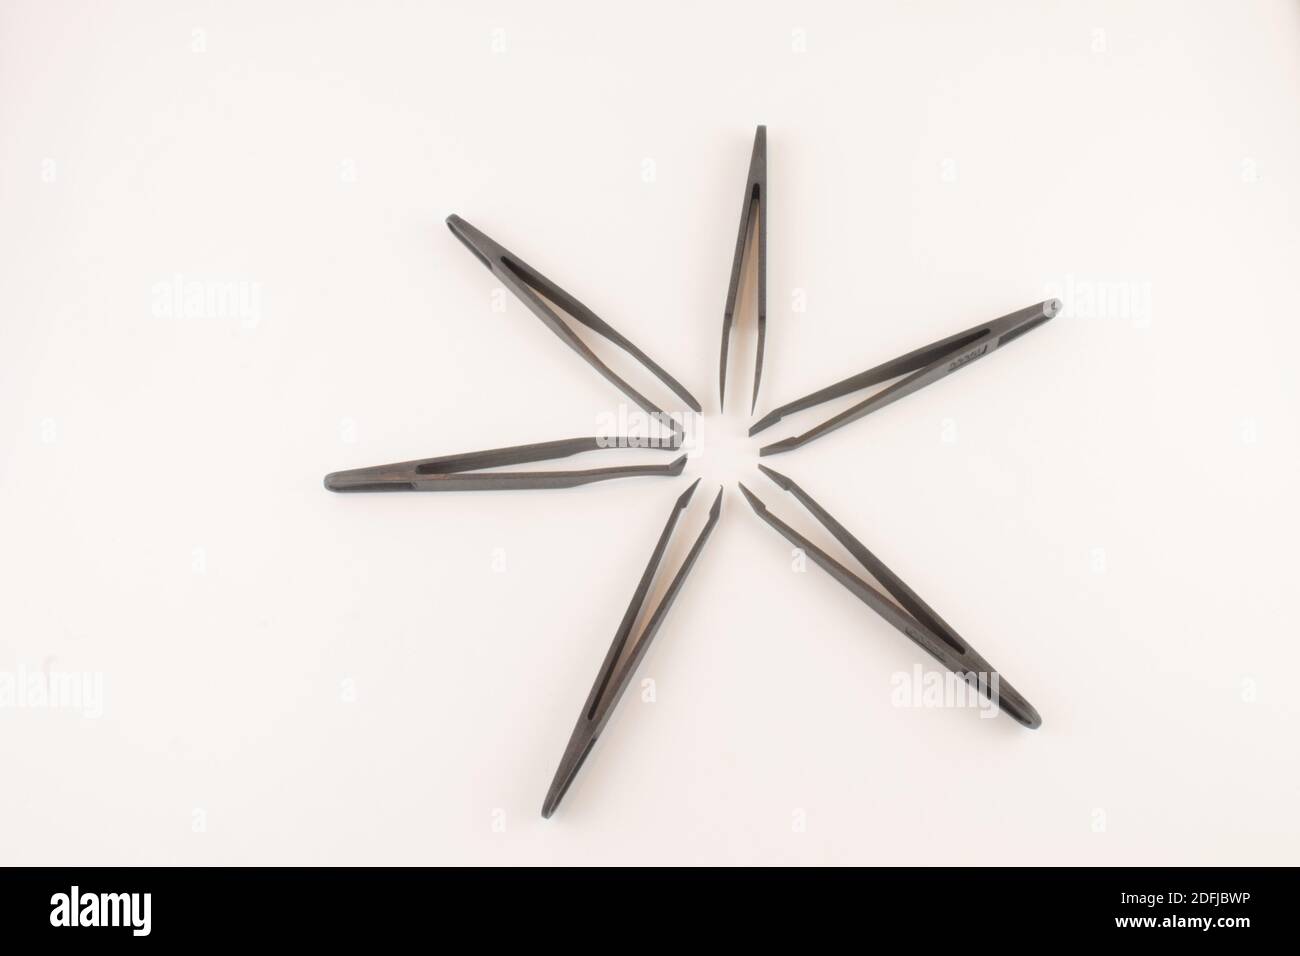 Black star made up of six pairs of black tweezers isolated on a white background Stock Photo